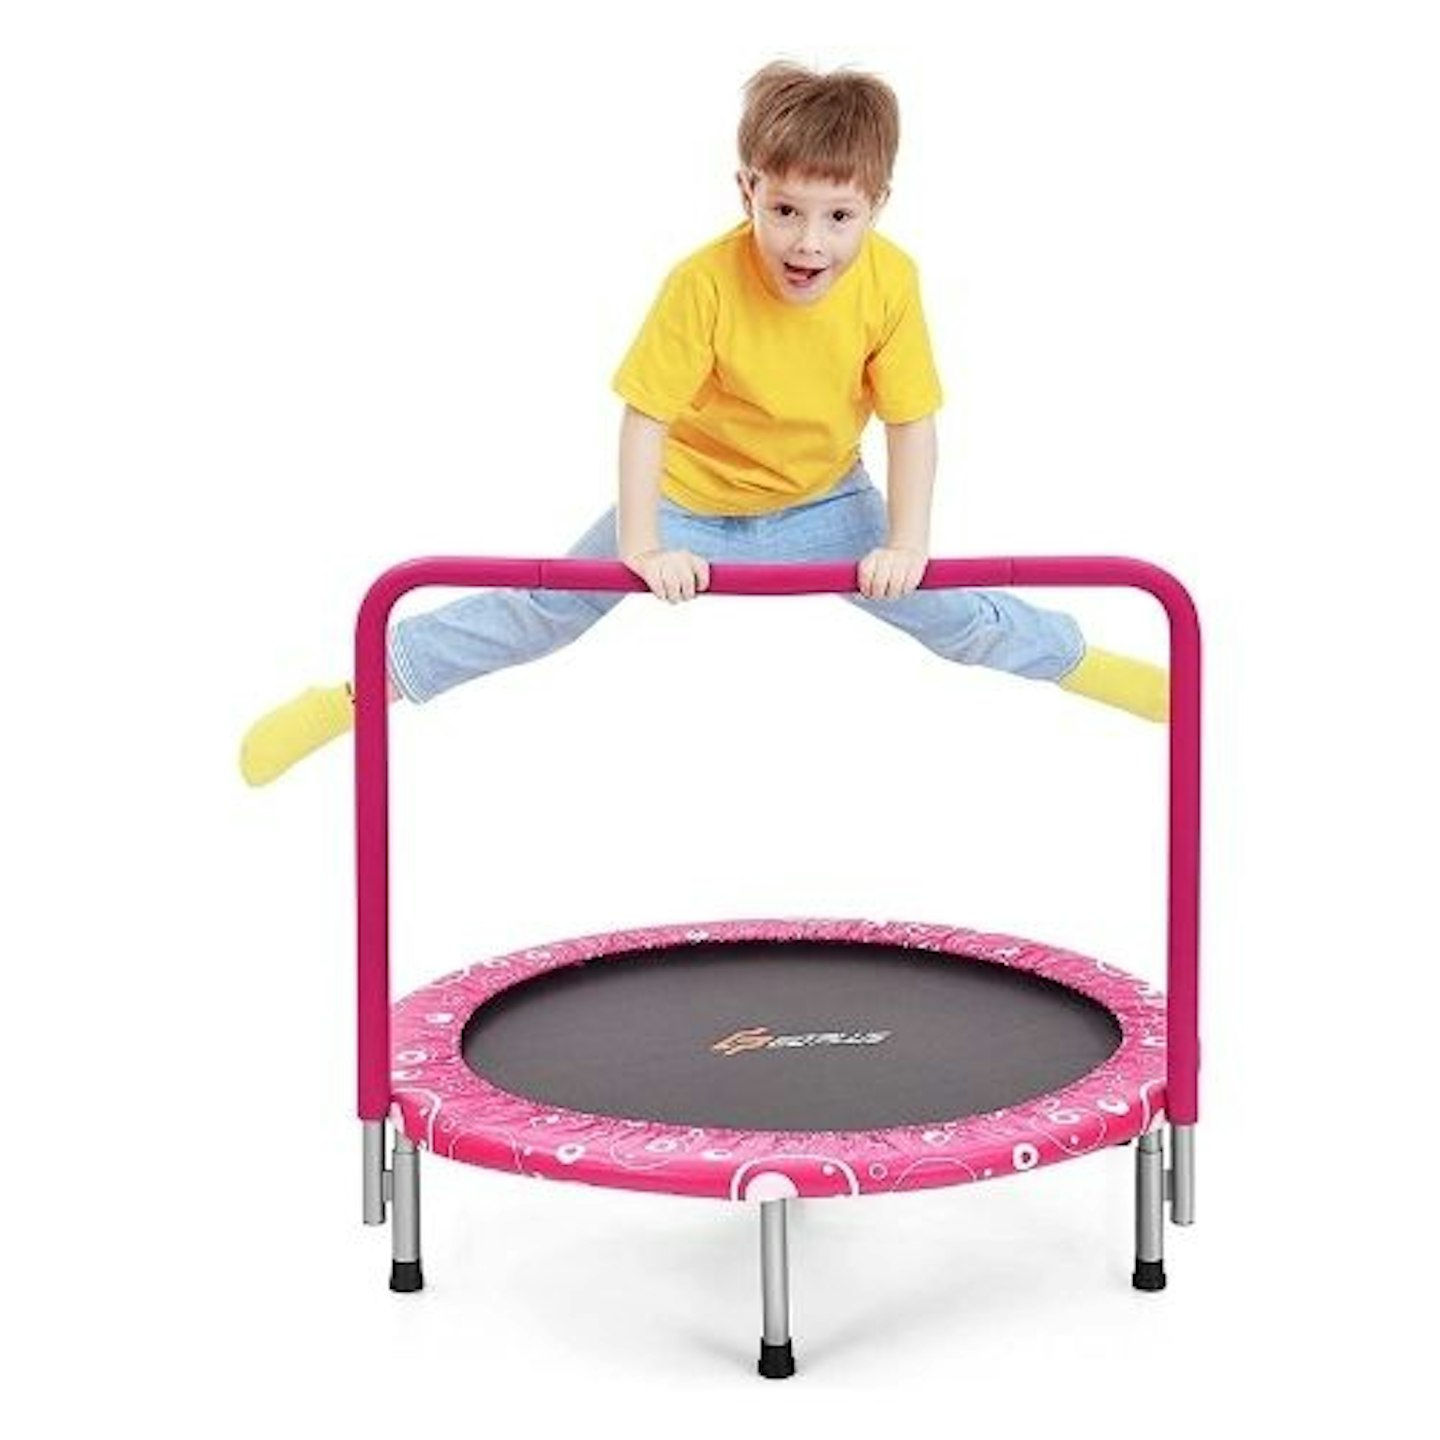 COSTWAY 36-Inch Mini Trampoline with Handle